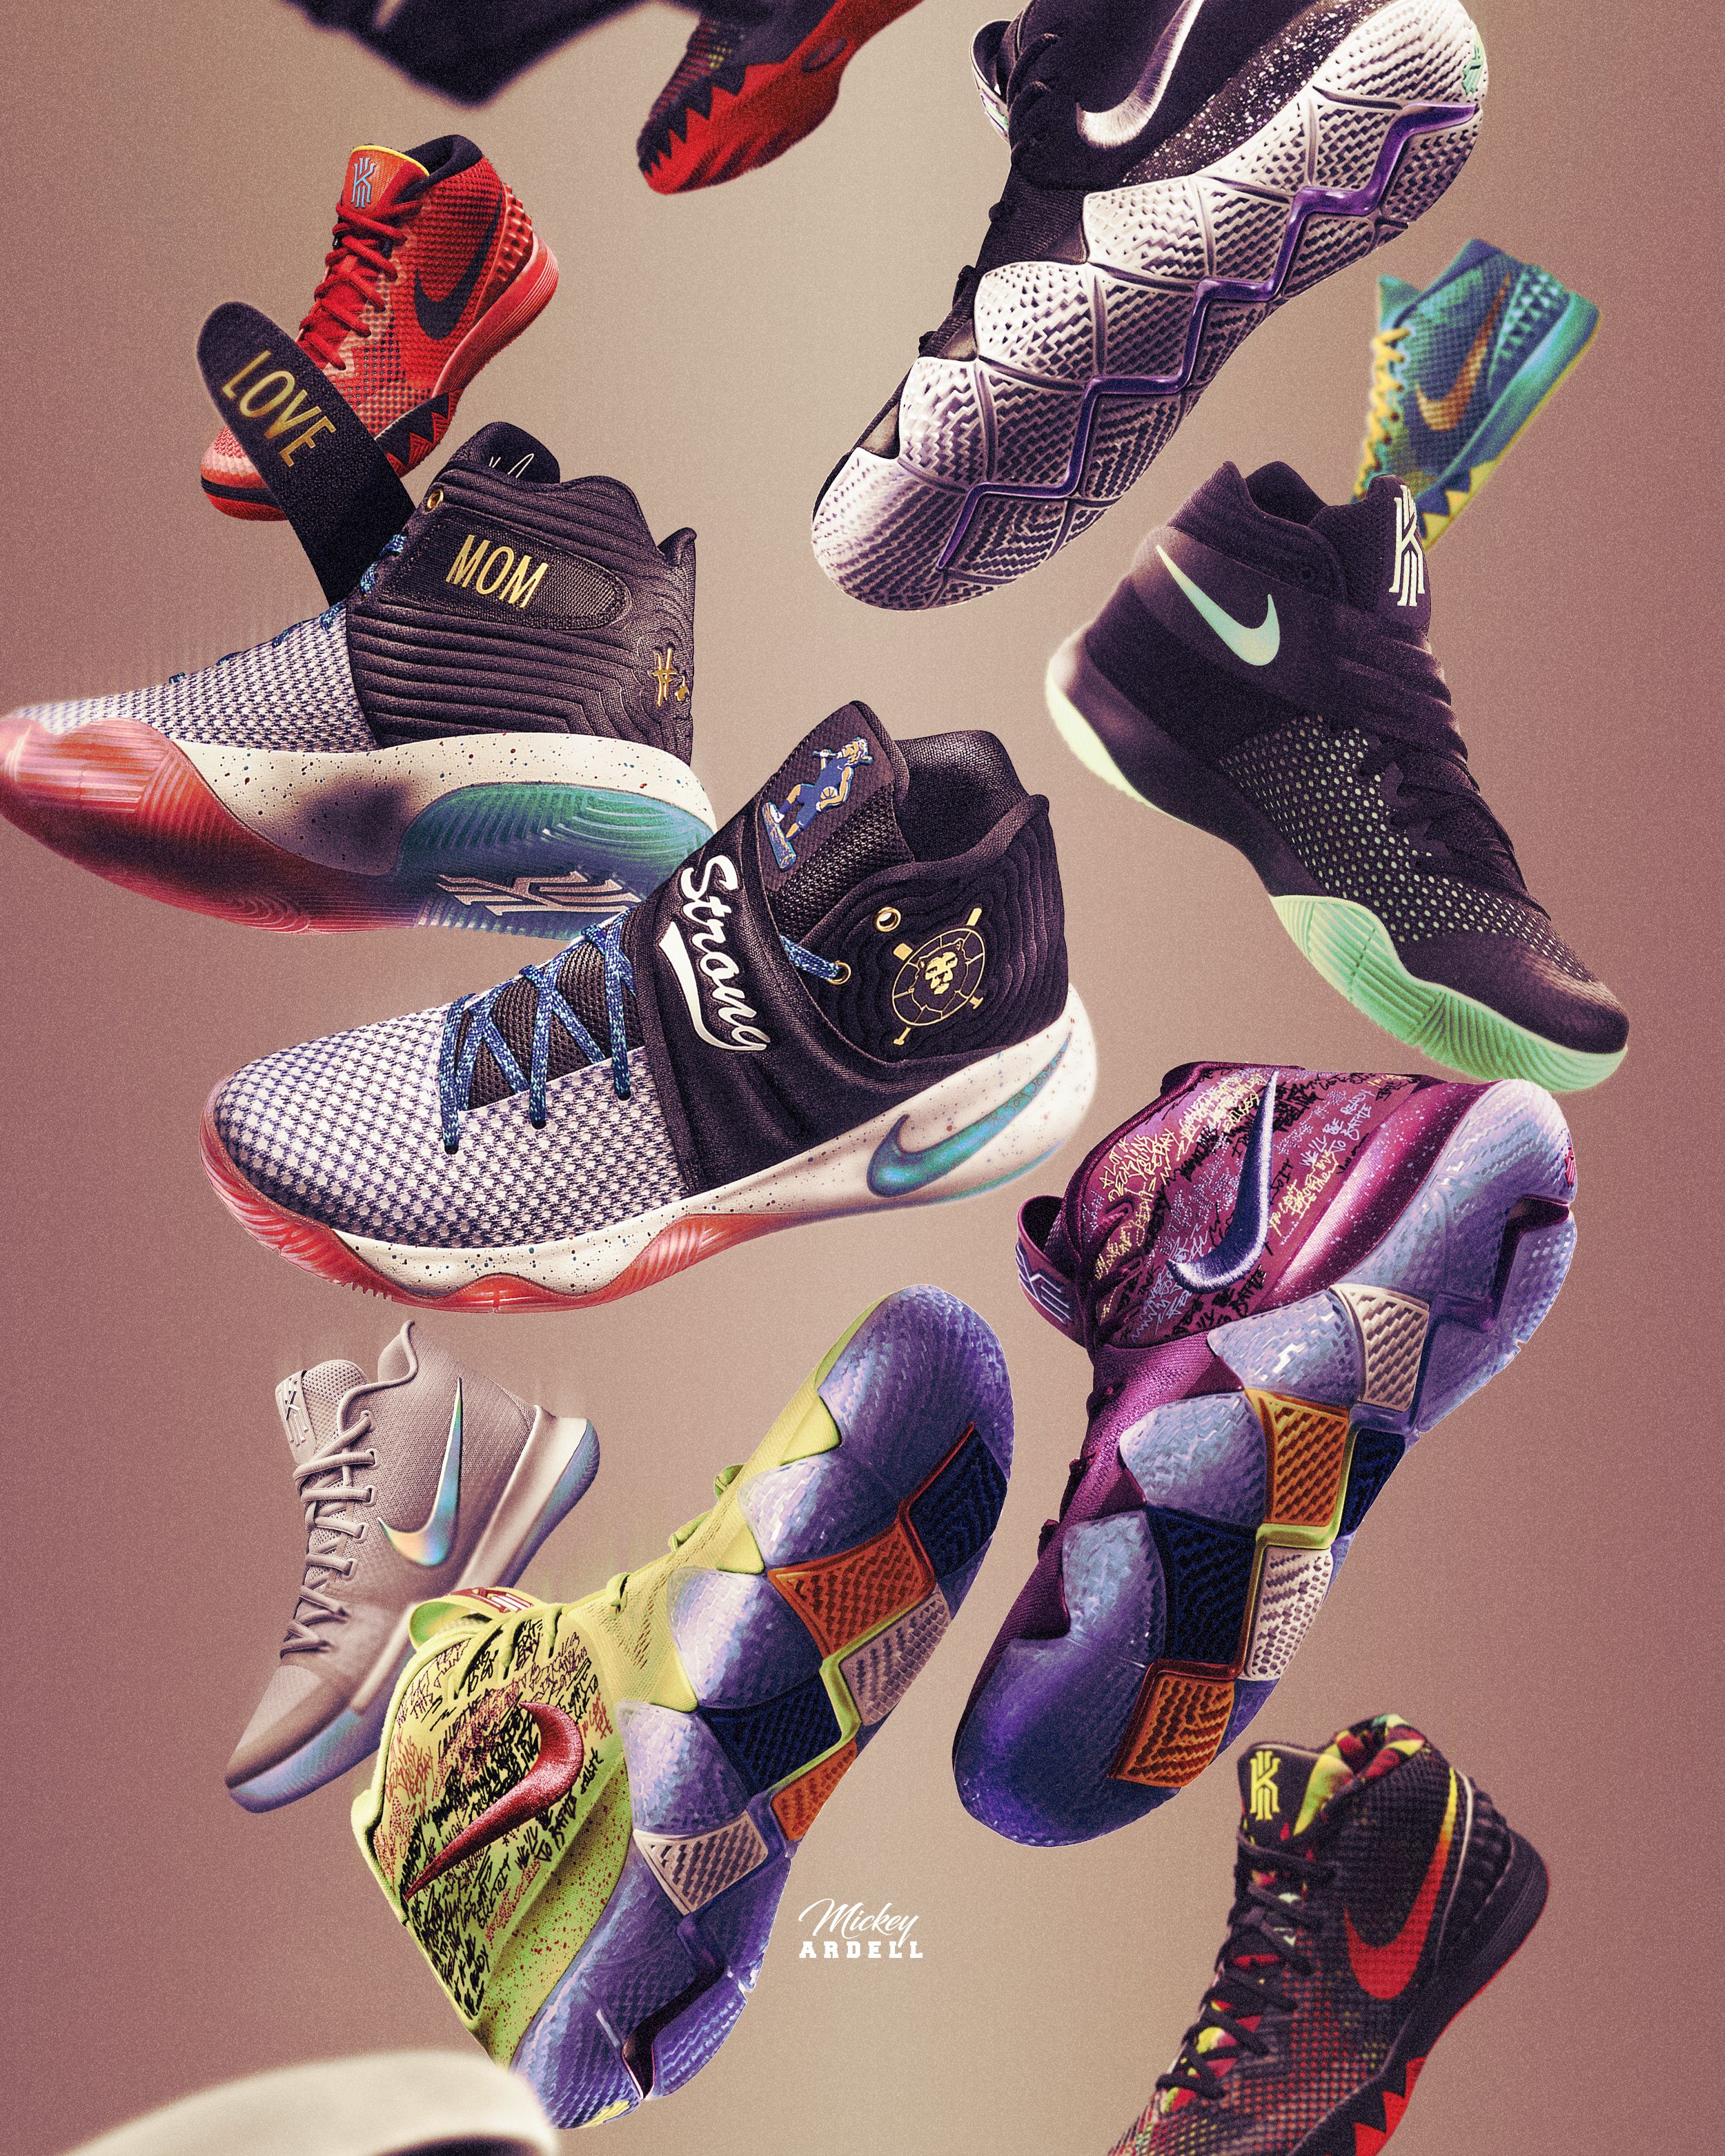 Kyrie's Shoes Wallpapers Wallpaper Cave | vlr.eng.br